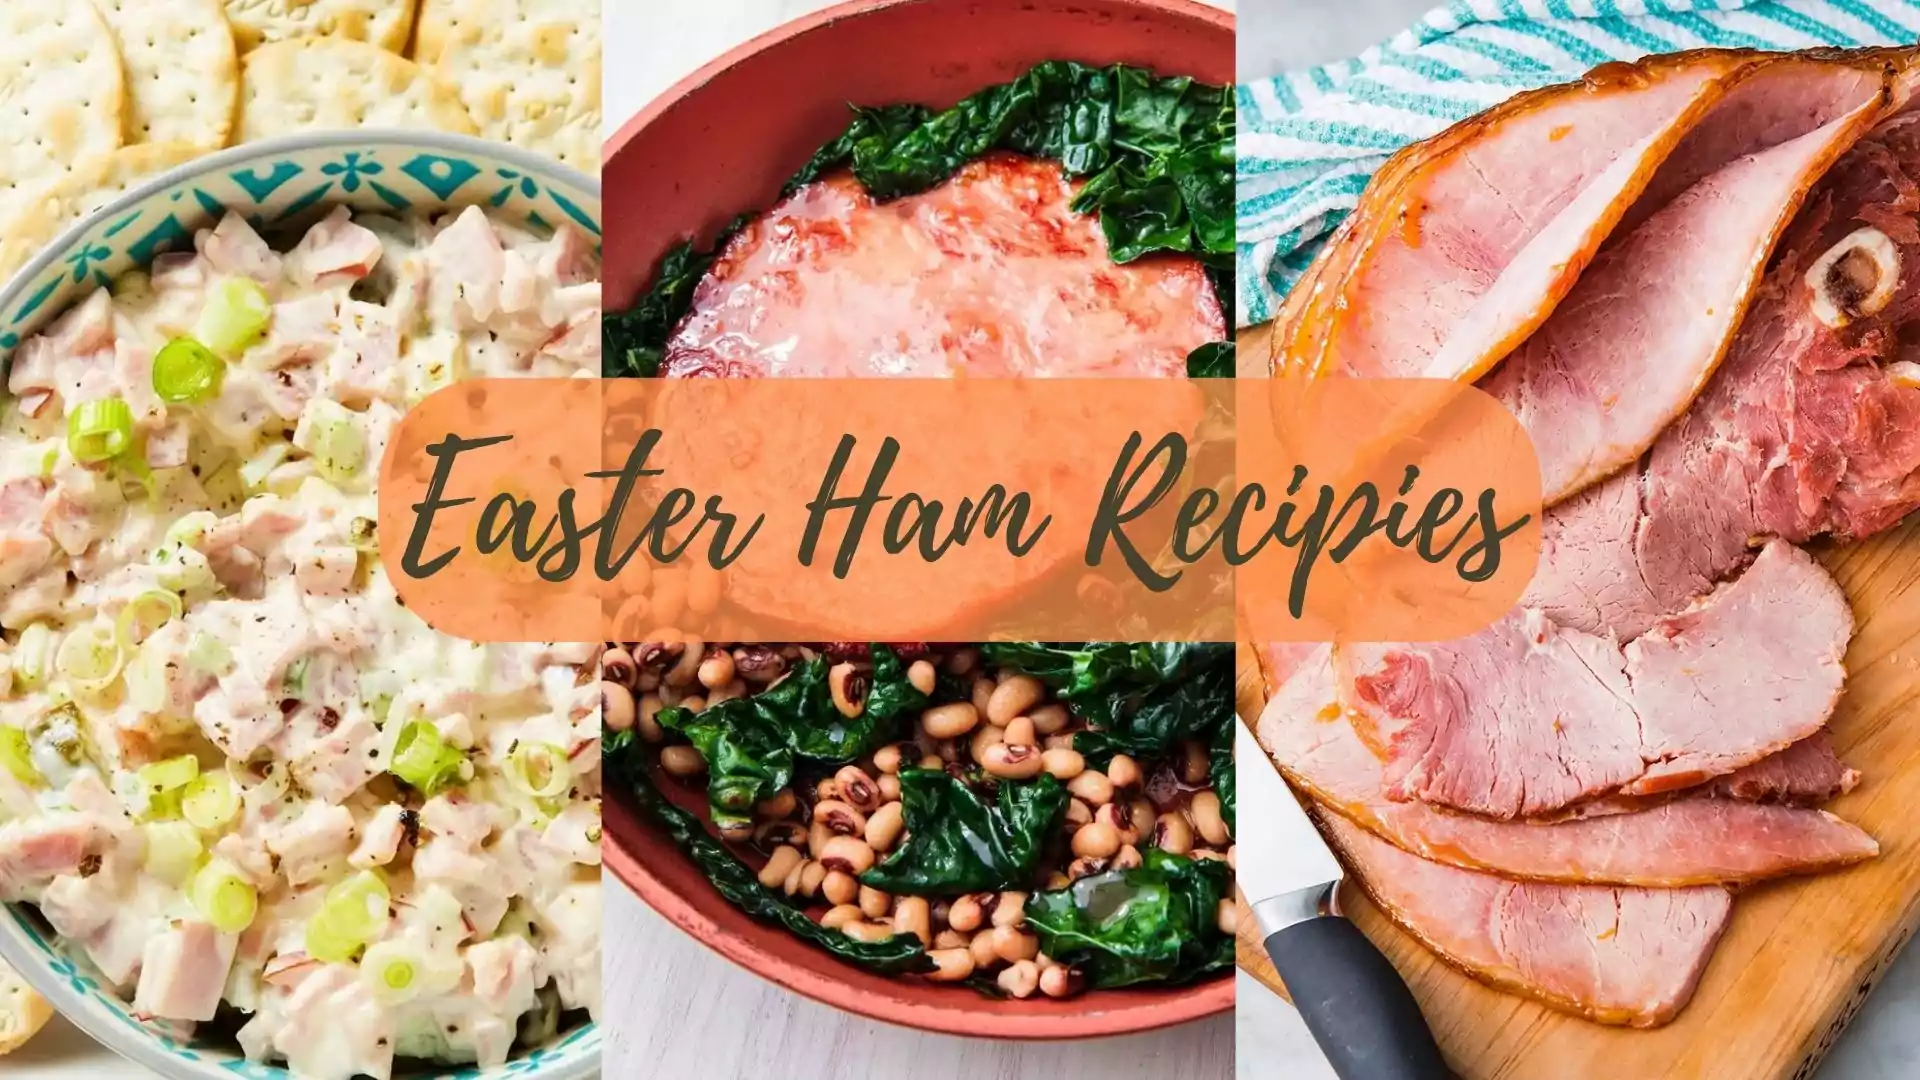 Easter Ham Recipies wallpaper and images | Easter 2022